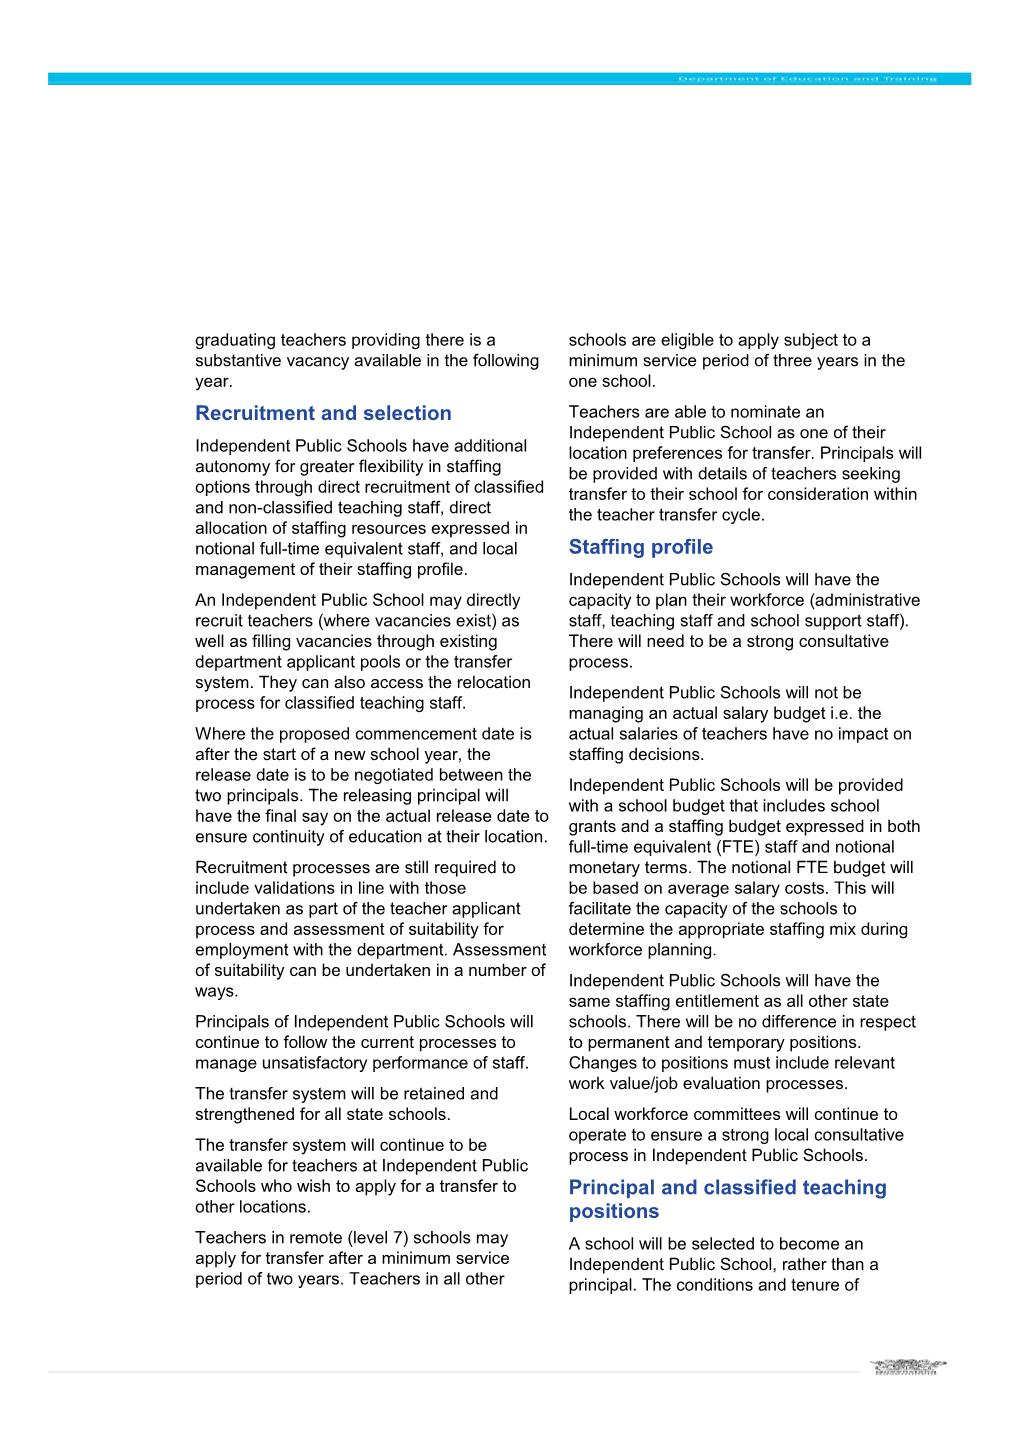 Independent Public Schools - Human Resources Fact Sheet